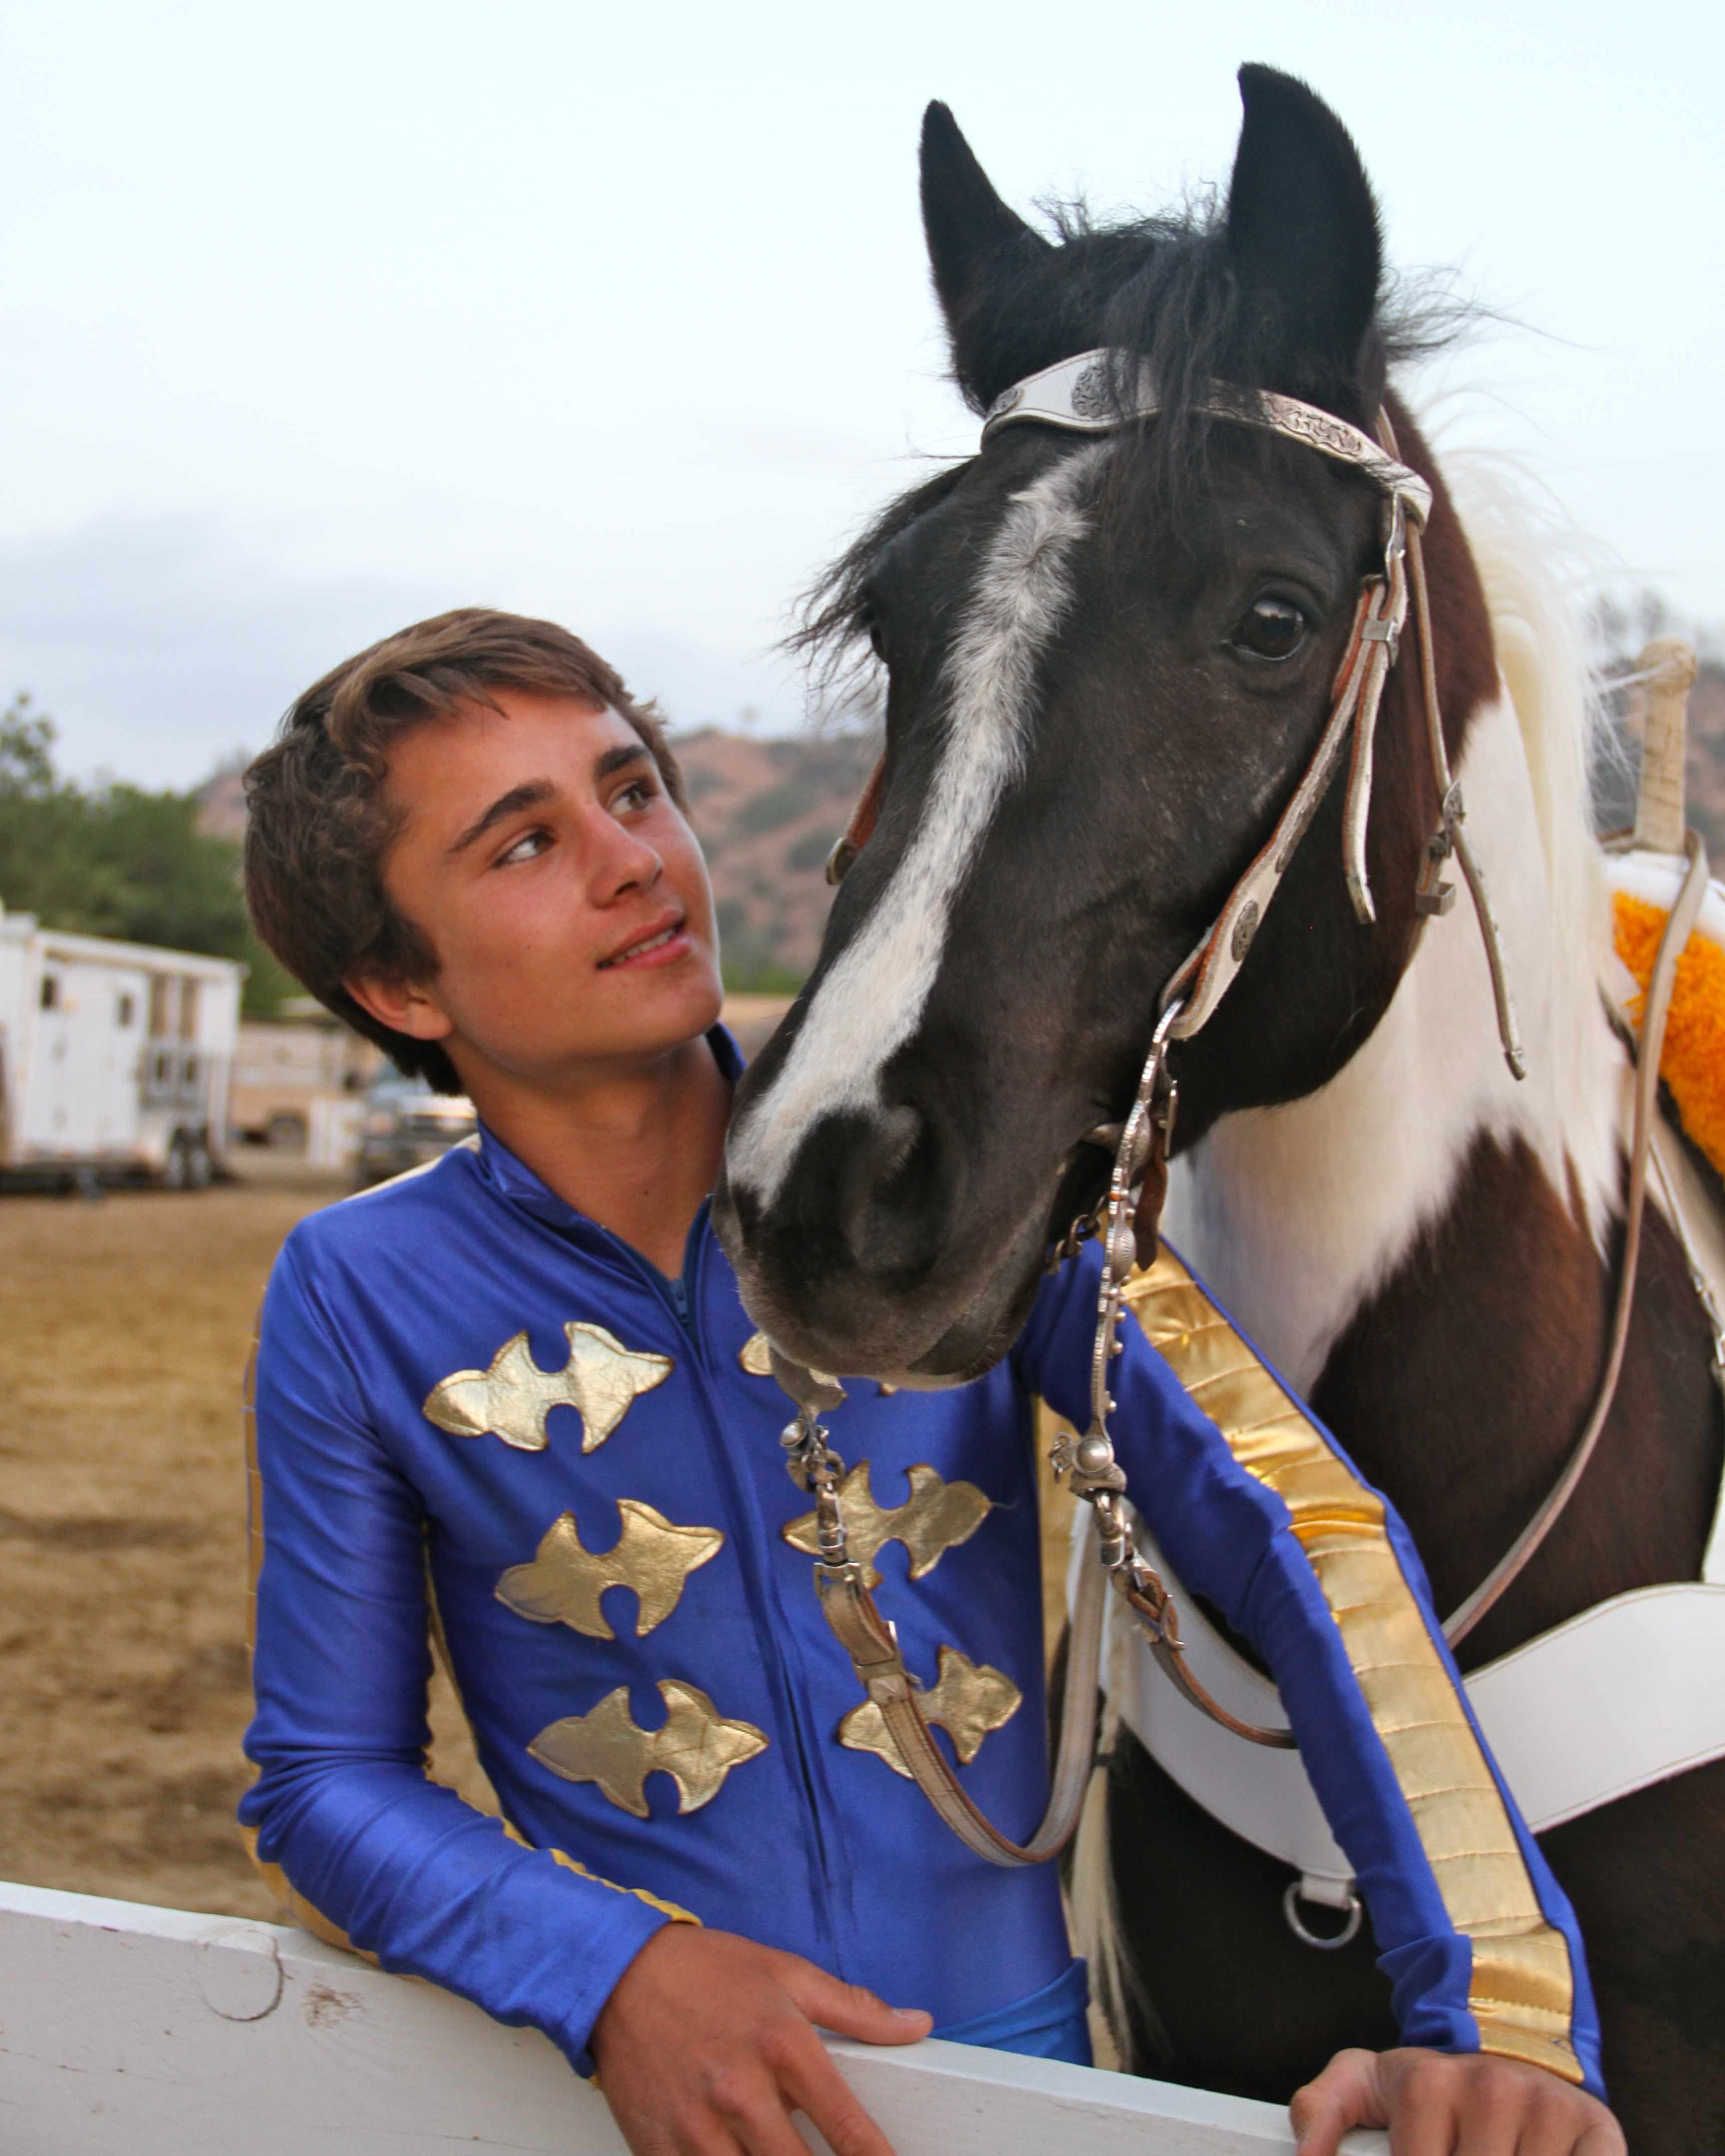 Gattlin and Sliver at the Fiesta of the Spanish Horse 2013.